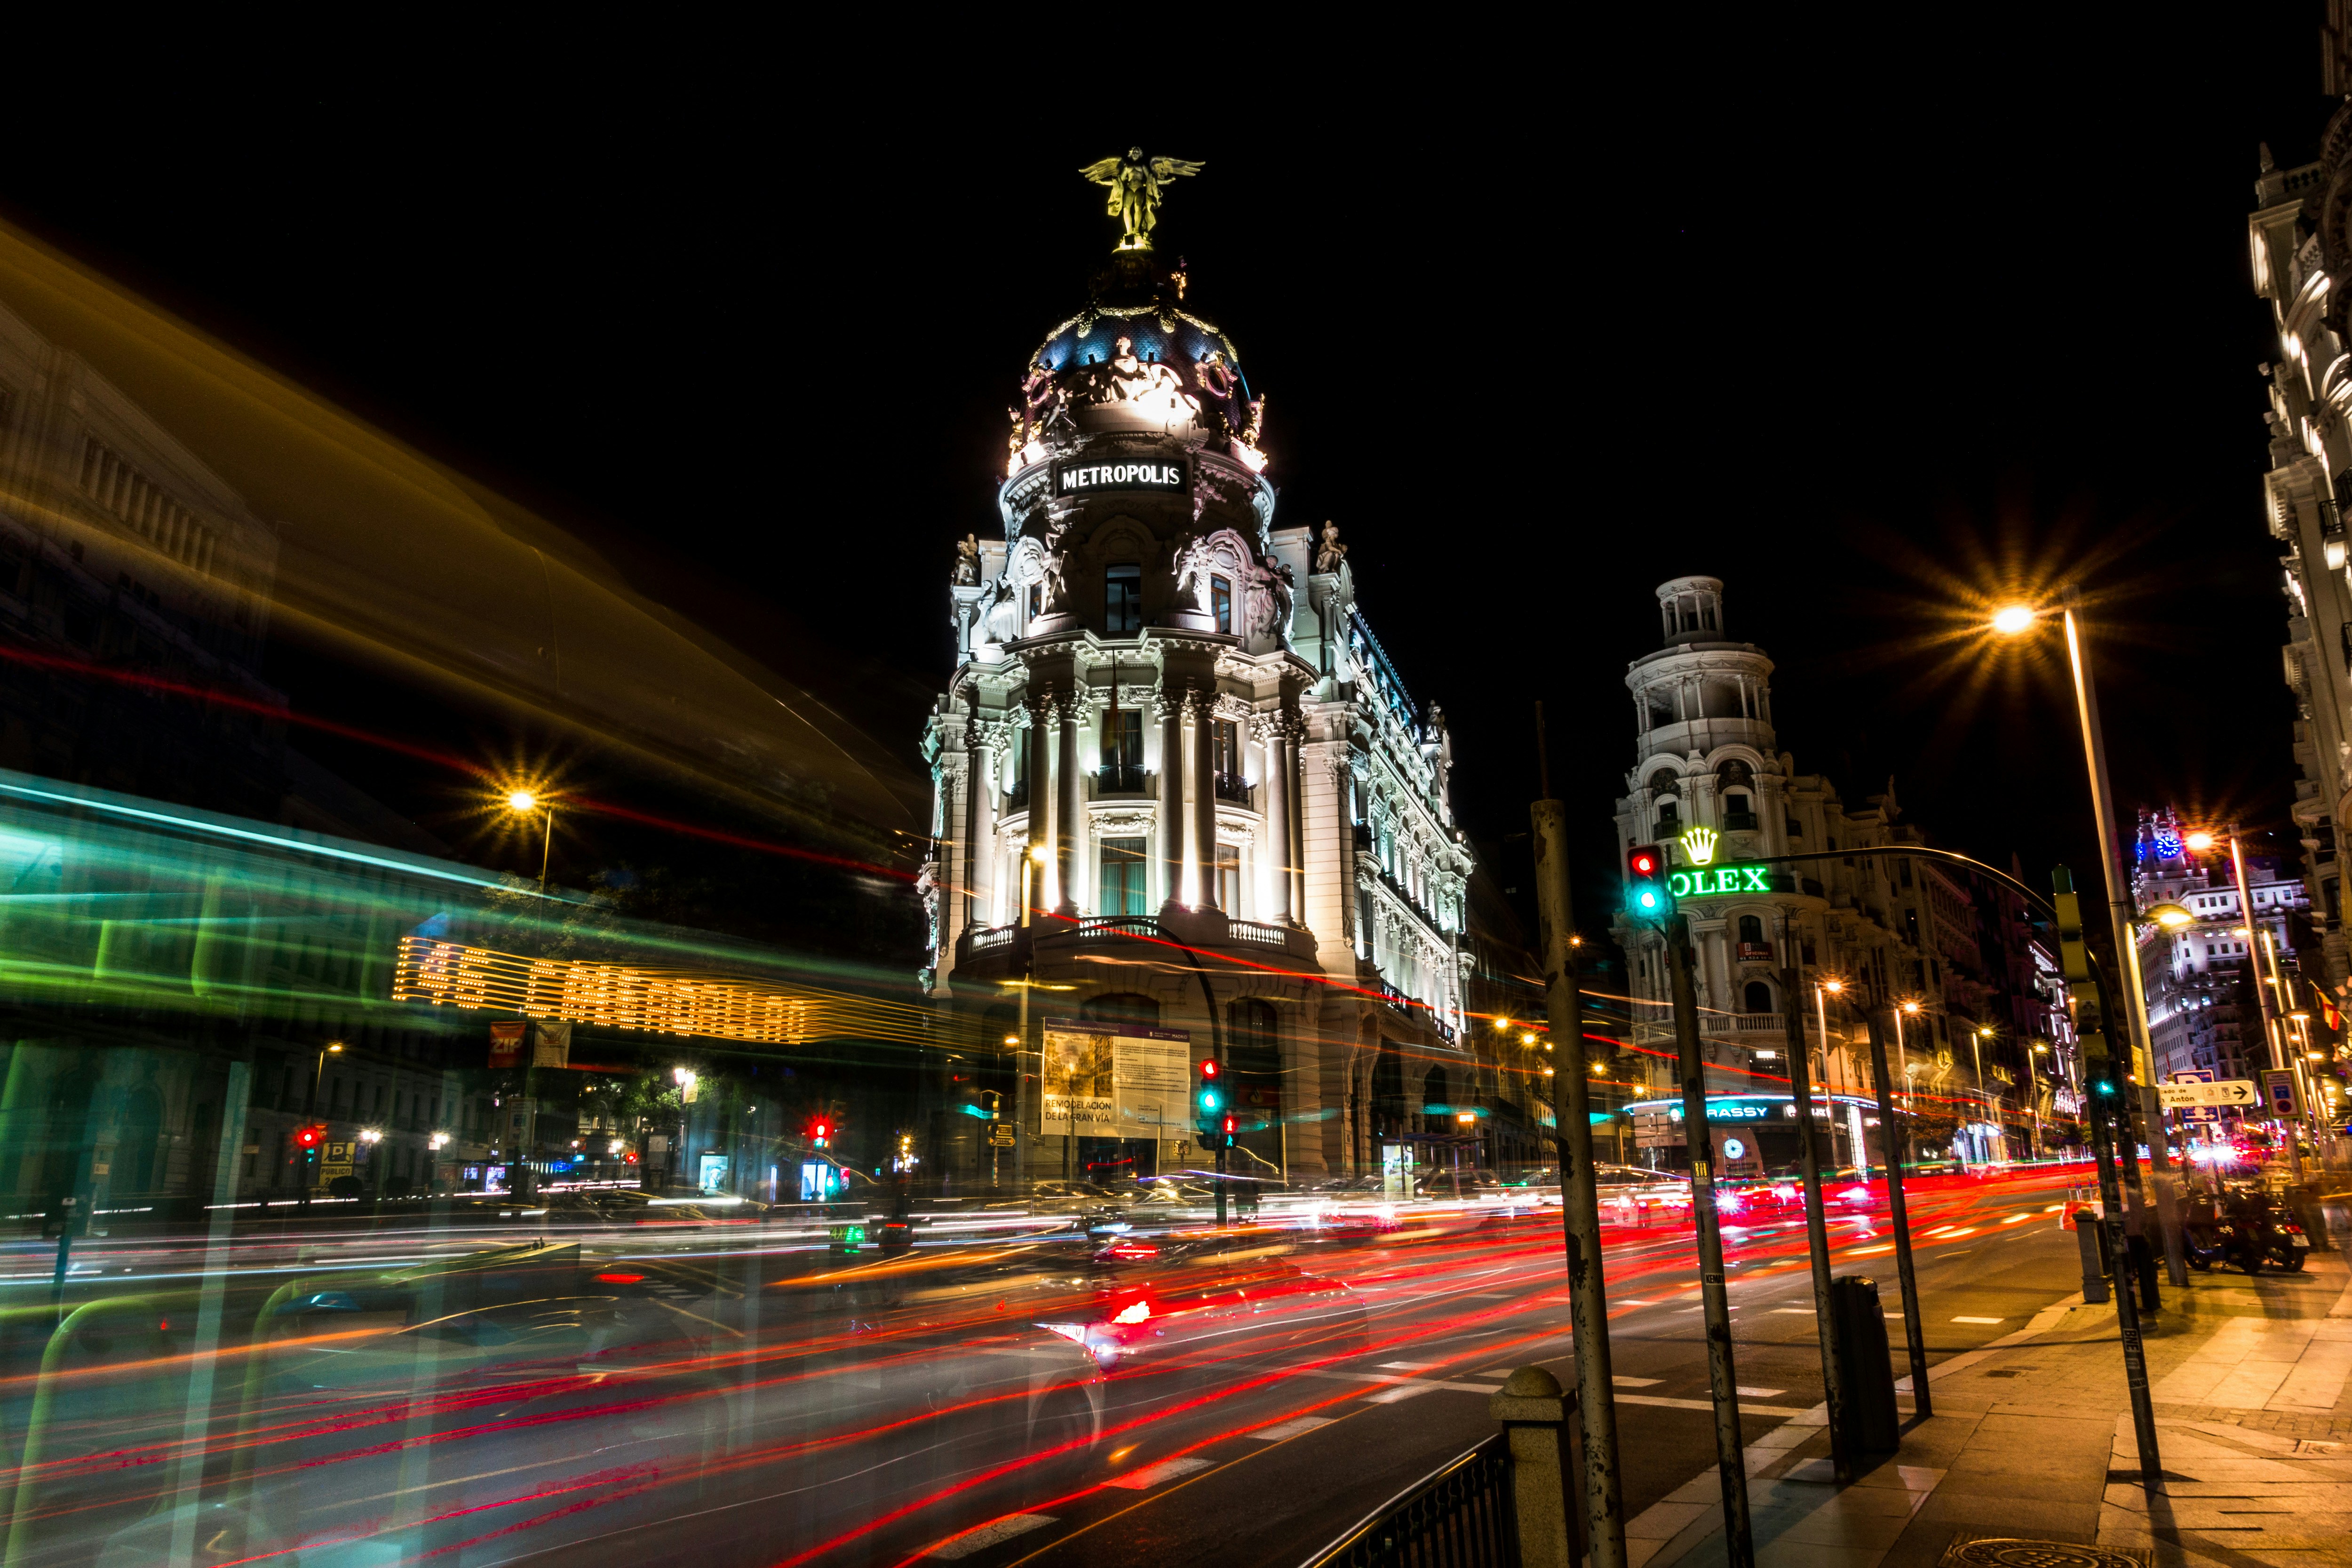 A bus driving by at night and a wonderful long-exposure capture in the beautiful city center of Madrid Spain. 👉🏻 Please credit my website: GlobalCareerBook.com 👈🏻